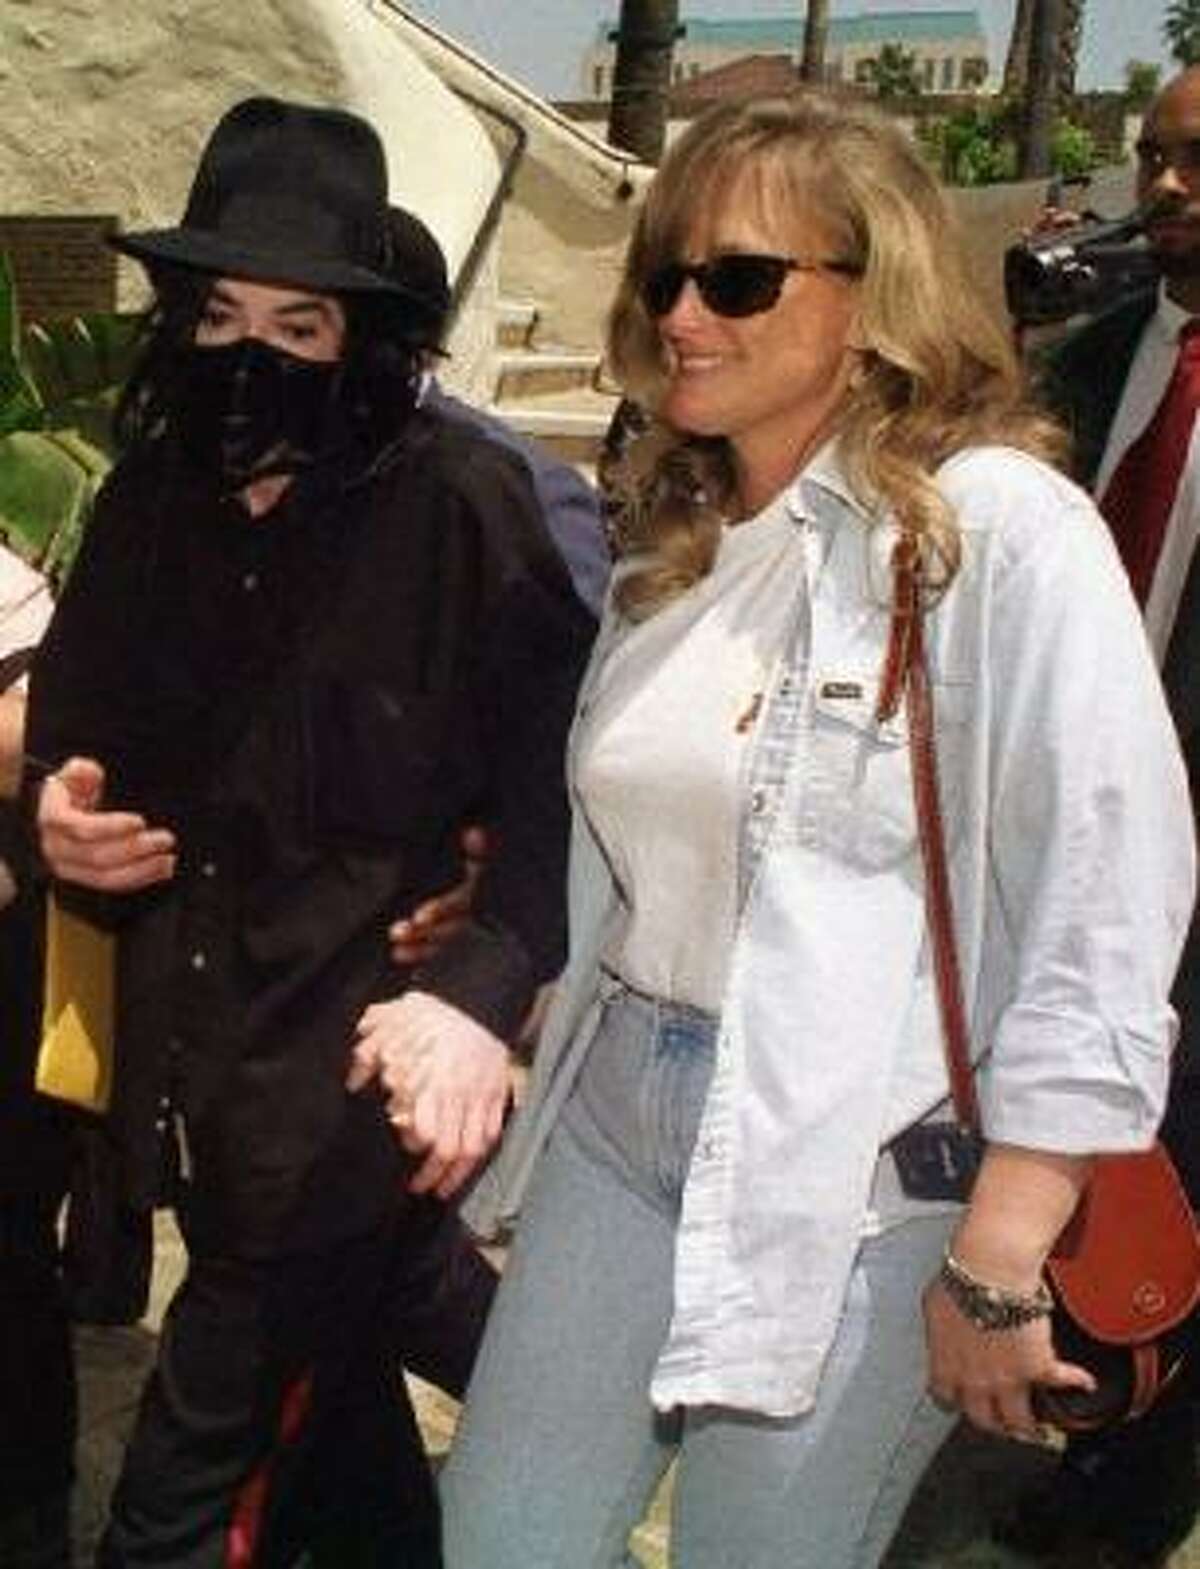 TMZ.com is alleging the two children Michael Jackson’s ex-wife Debbie Rowe gave birth to were conceived using anonymous donated sperm and eggs.